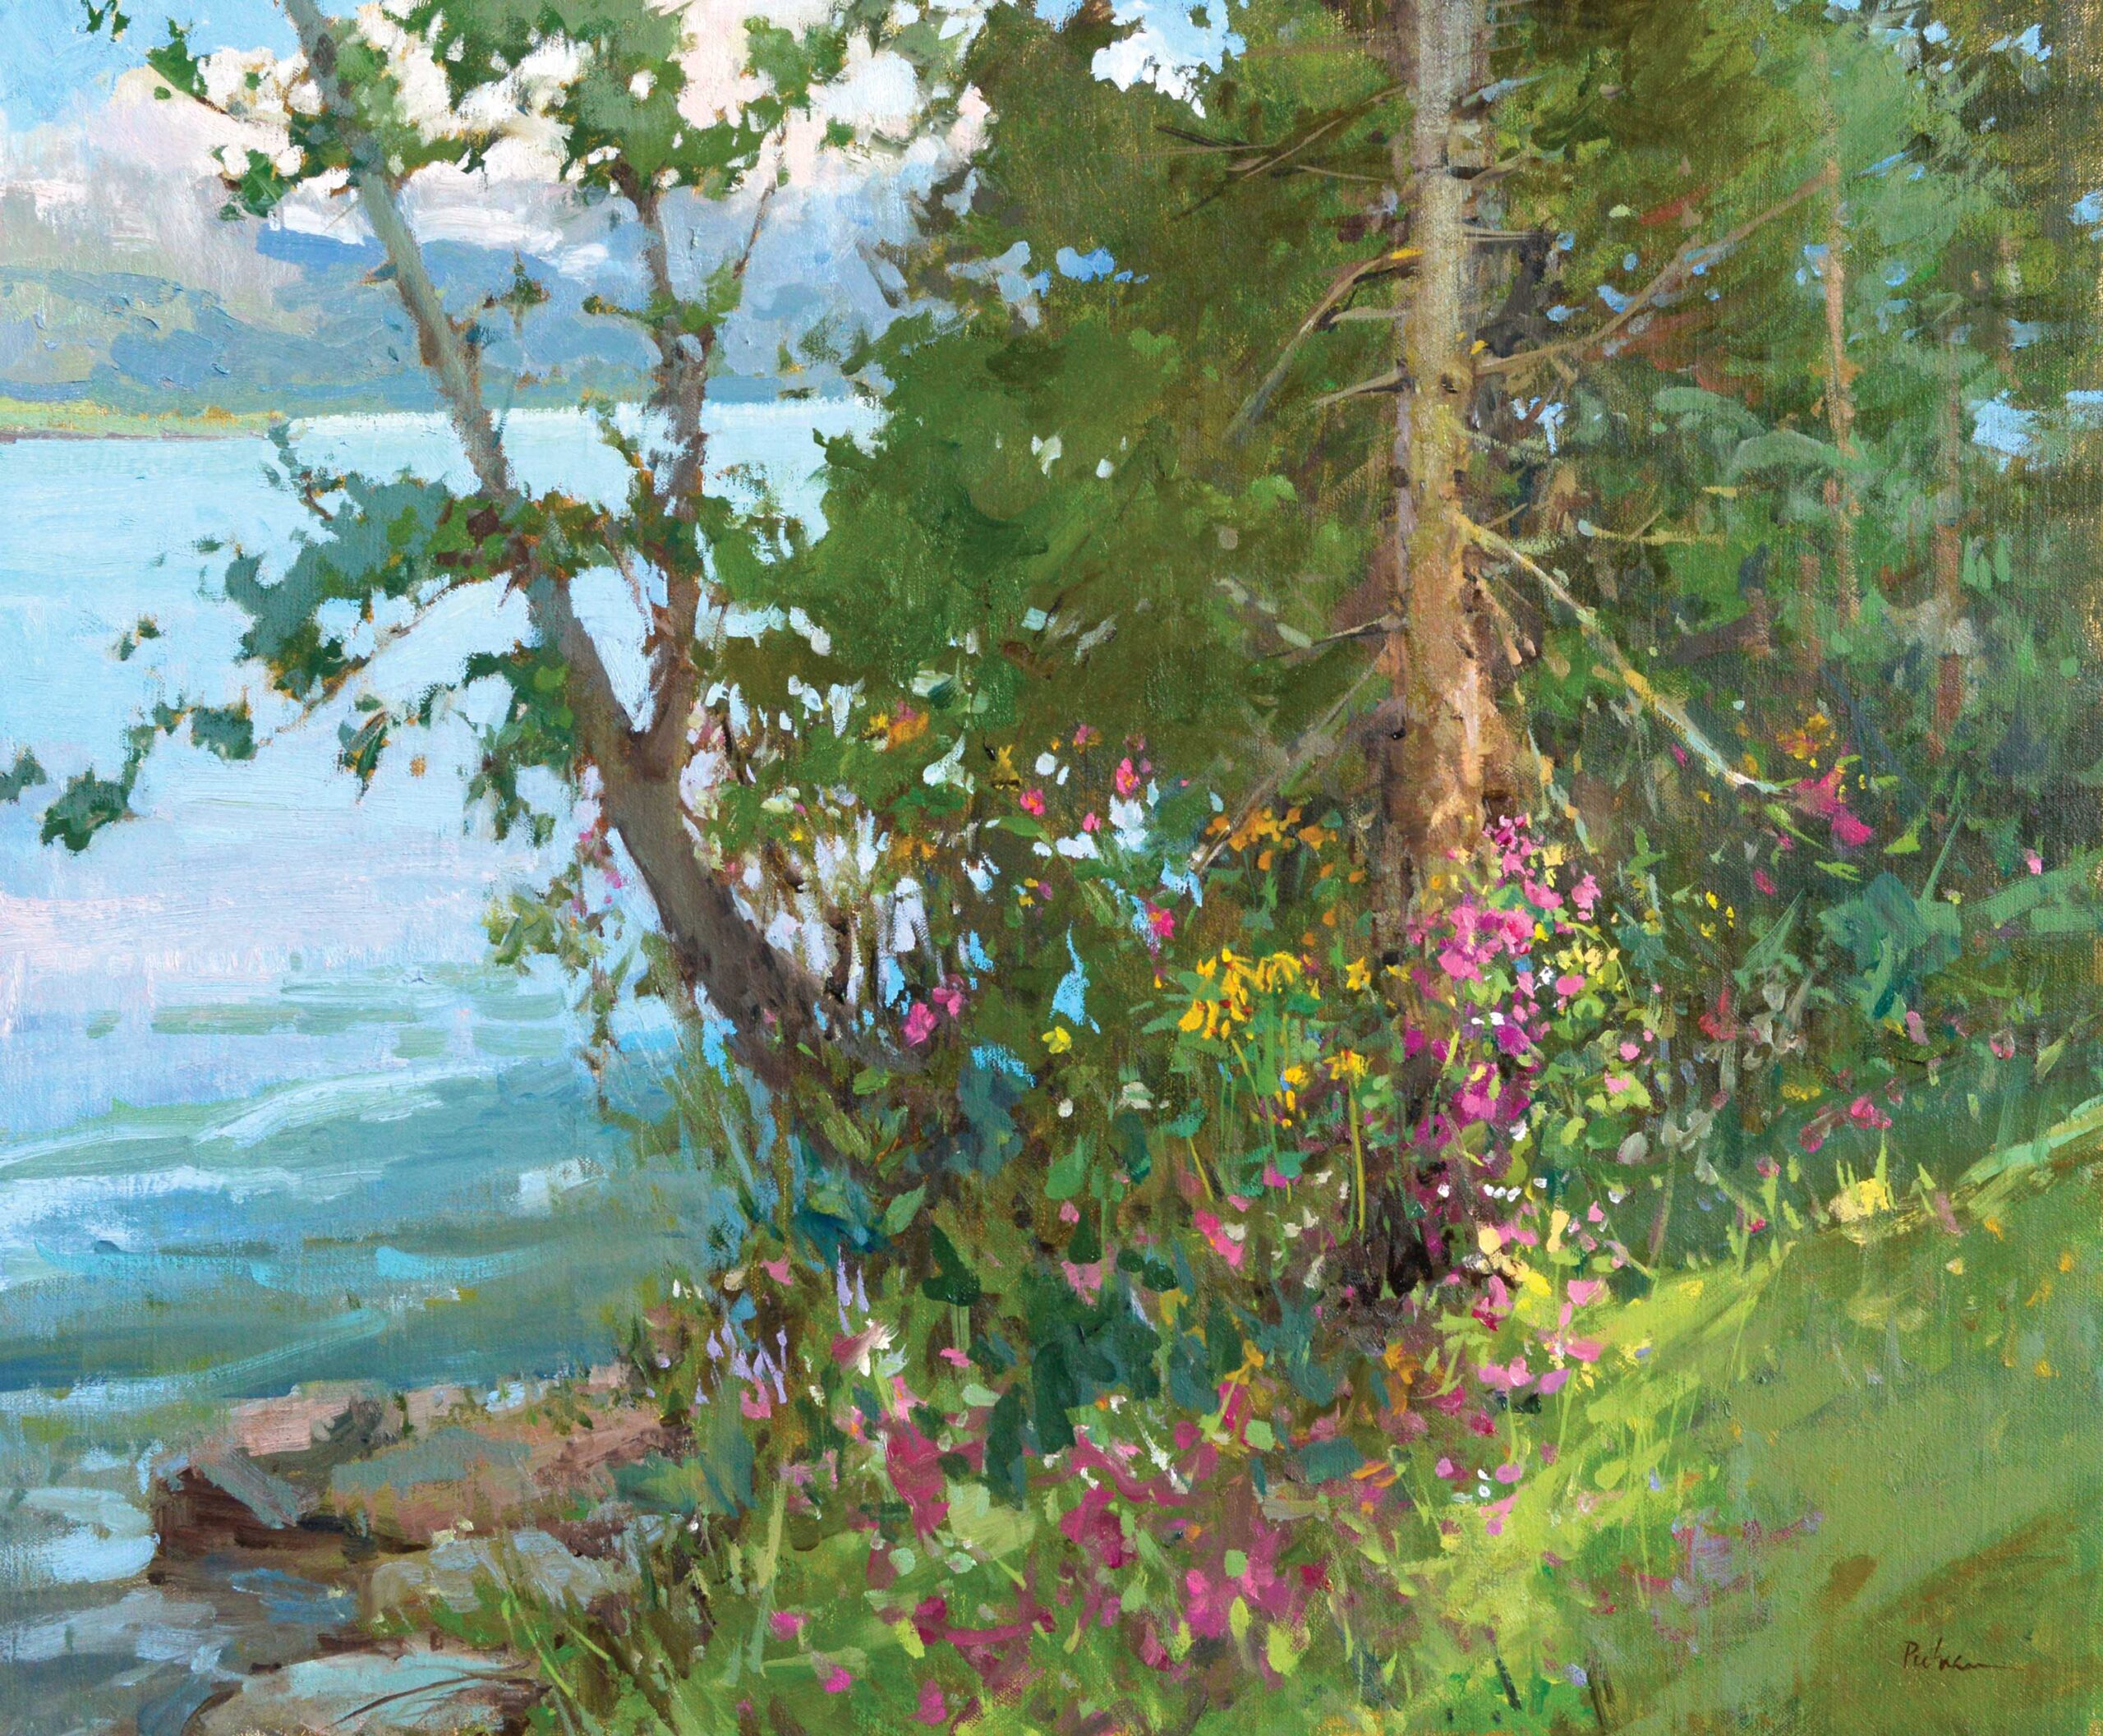 Lori Putnam, "Spring Growth," 2018, oil, 20 x 24 in., Collection the artist, Studio from plein air study, Wild Rose Country, Waterton Lakes National Parks, Alberta, Canada